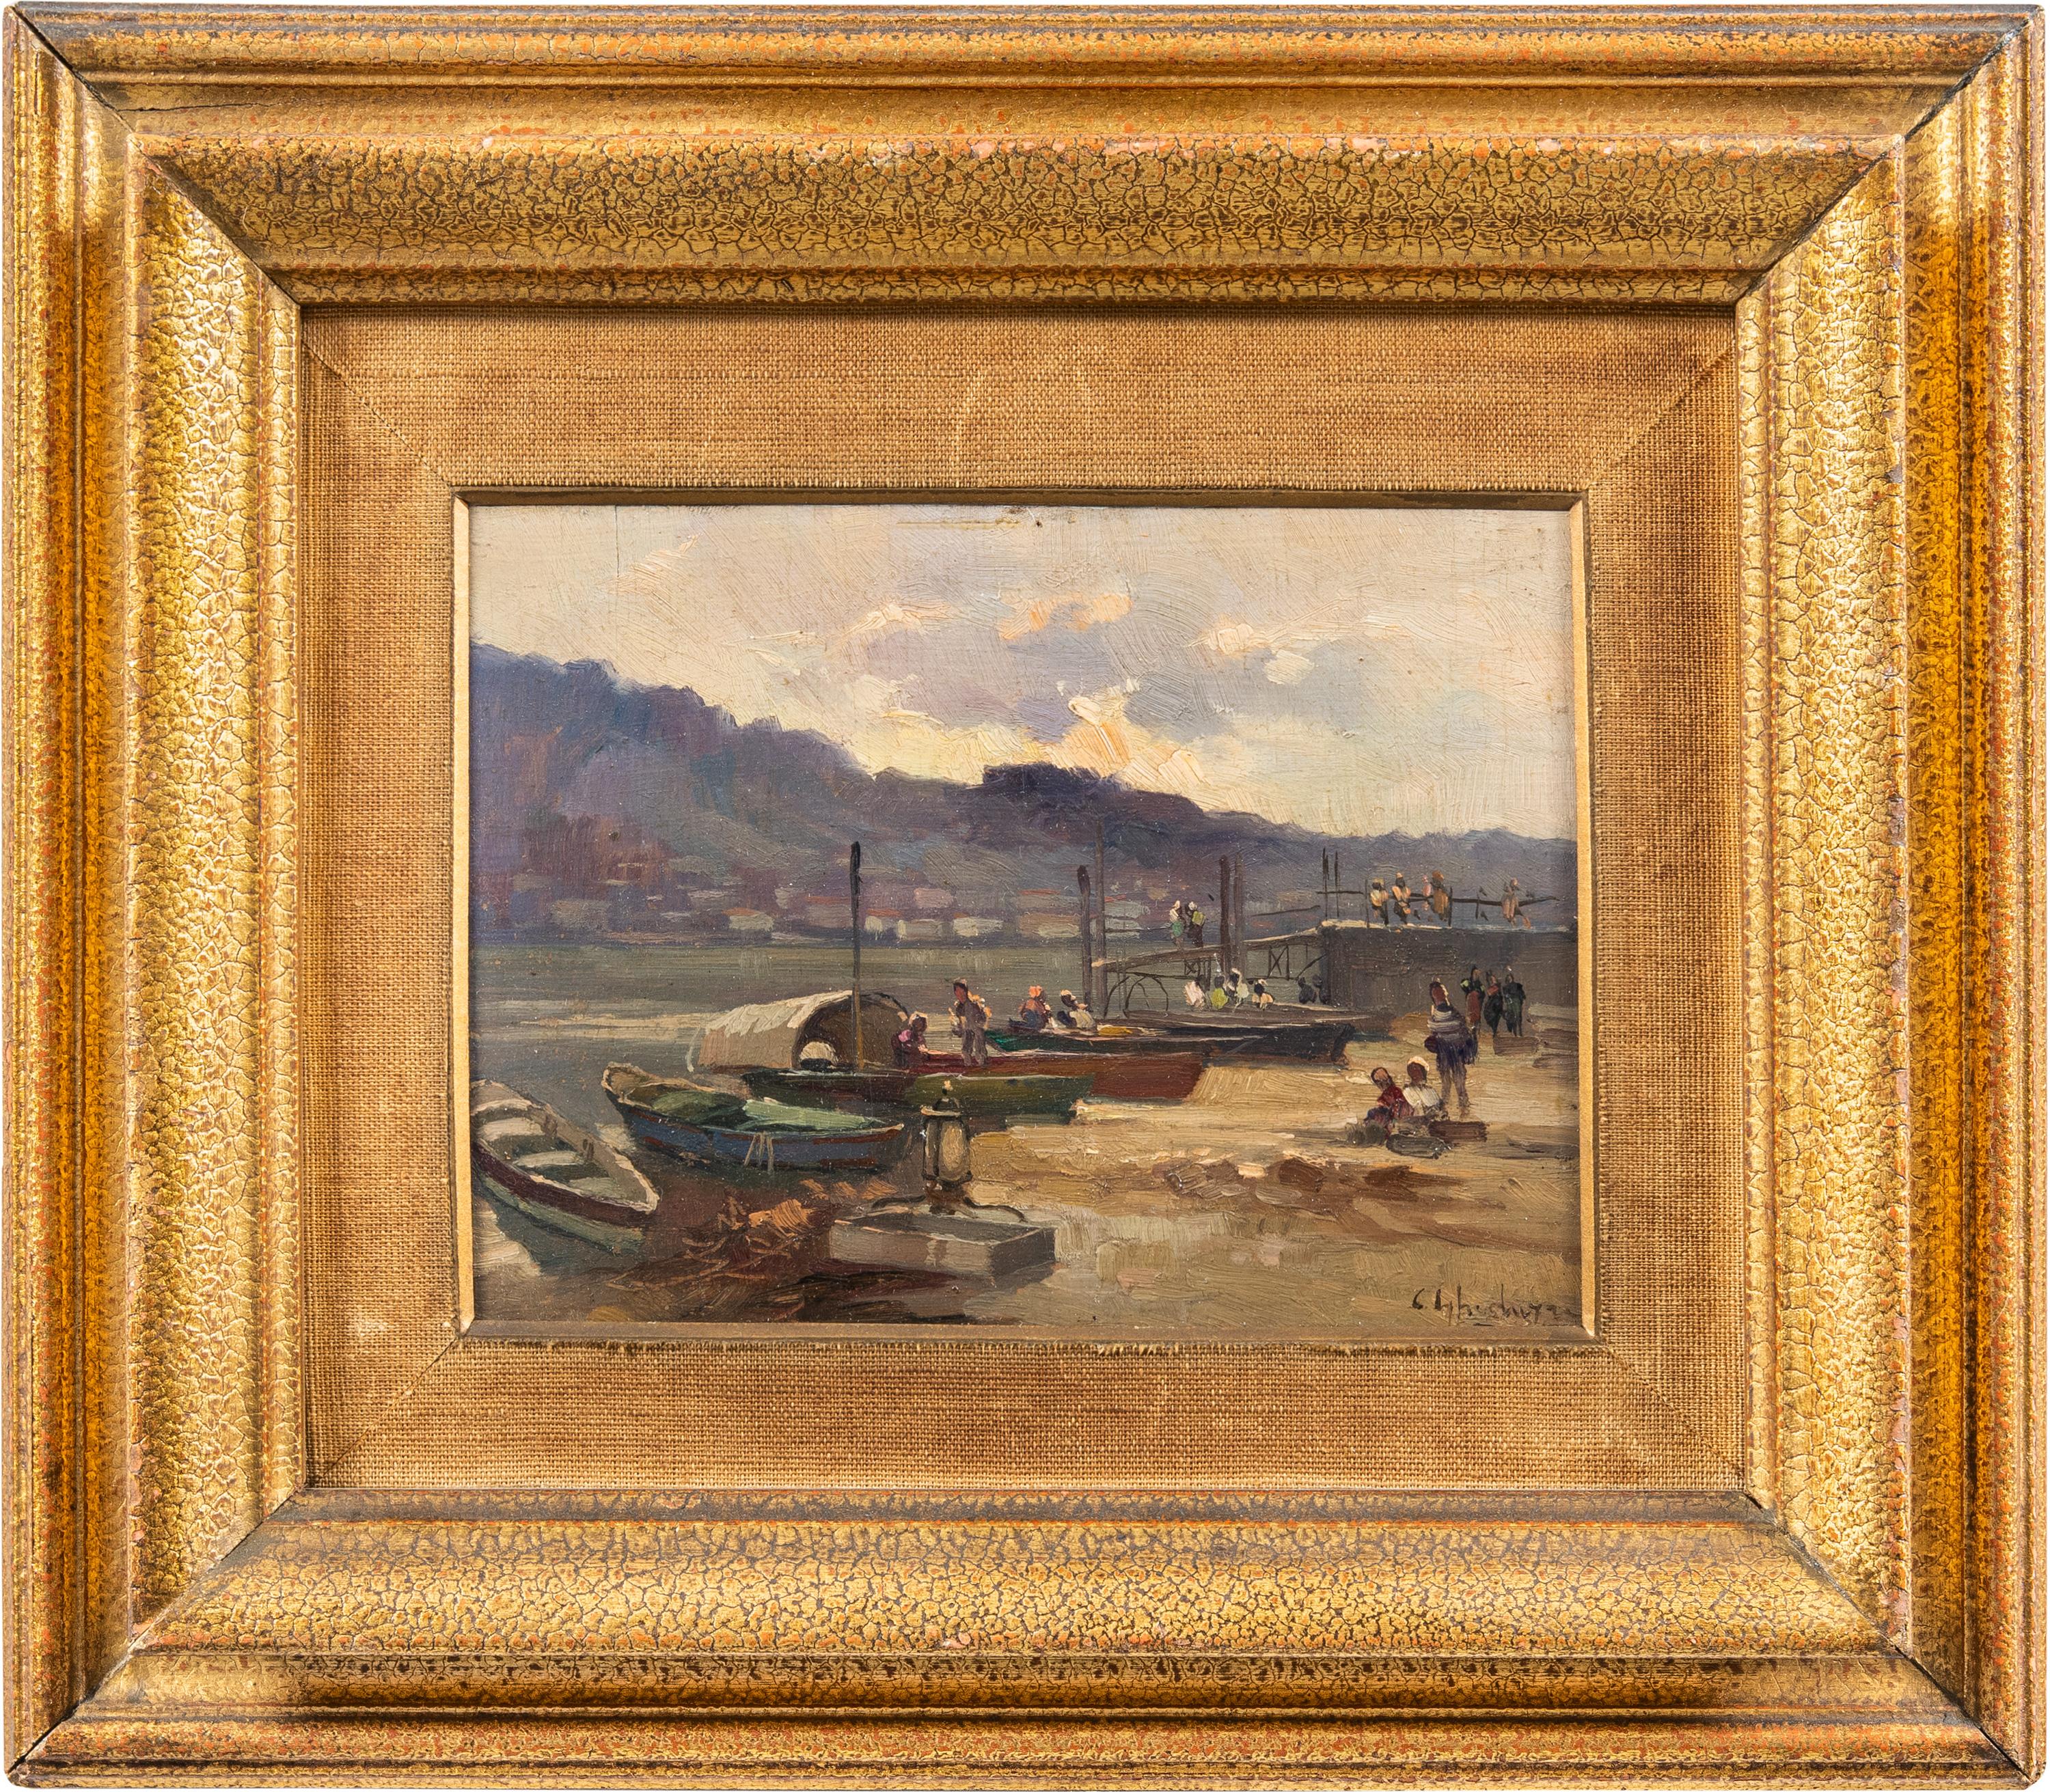 Cesare Gheduzzi (Crespellano 1894 - Turin 1957) - Port scene.

20.5 x 25 cm without frame, 29.5 x 34 cm with frame.

Oil on panel, in giltwood frame.

- Work signed on the lower right: “C. Gheduzzi".

Condition report: Good state of conservation of